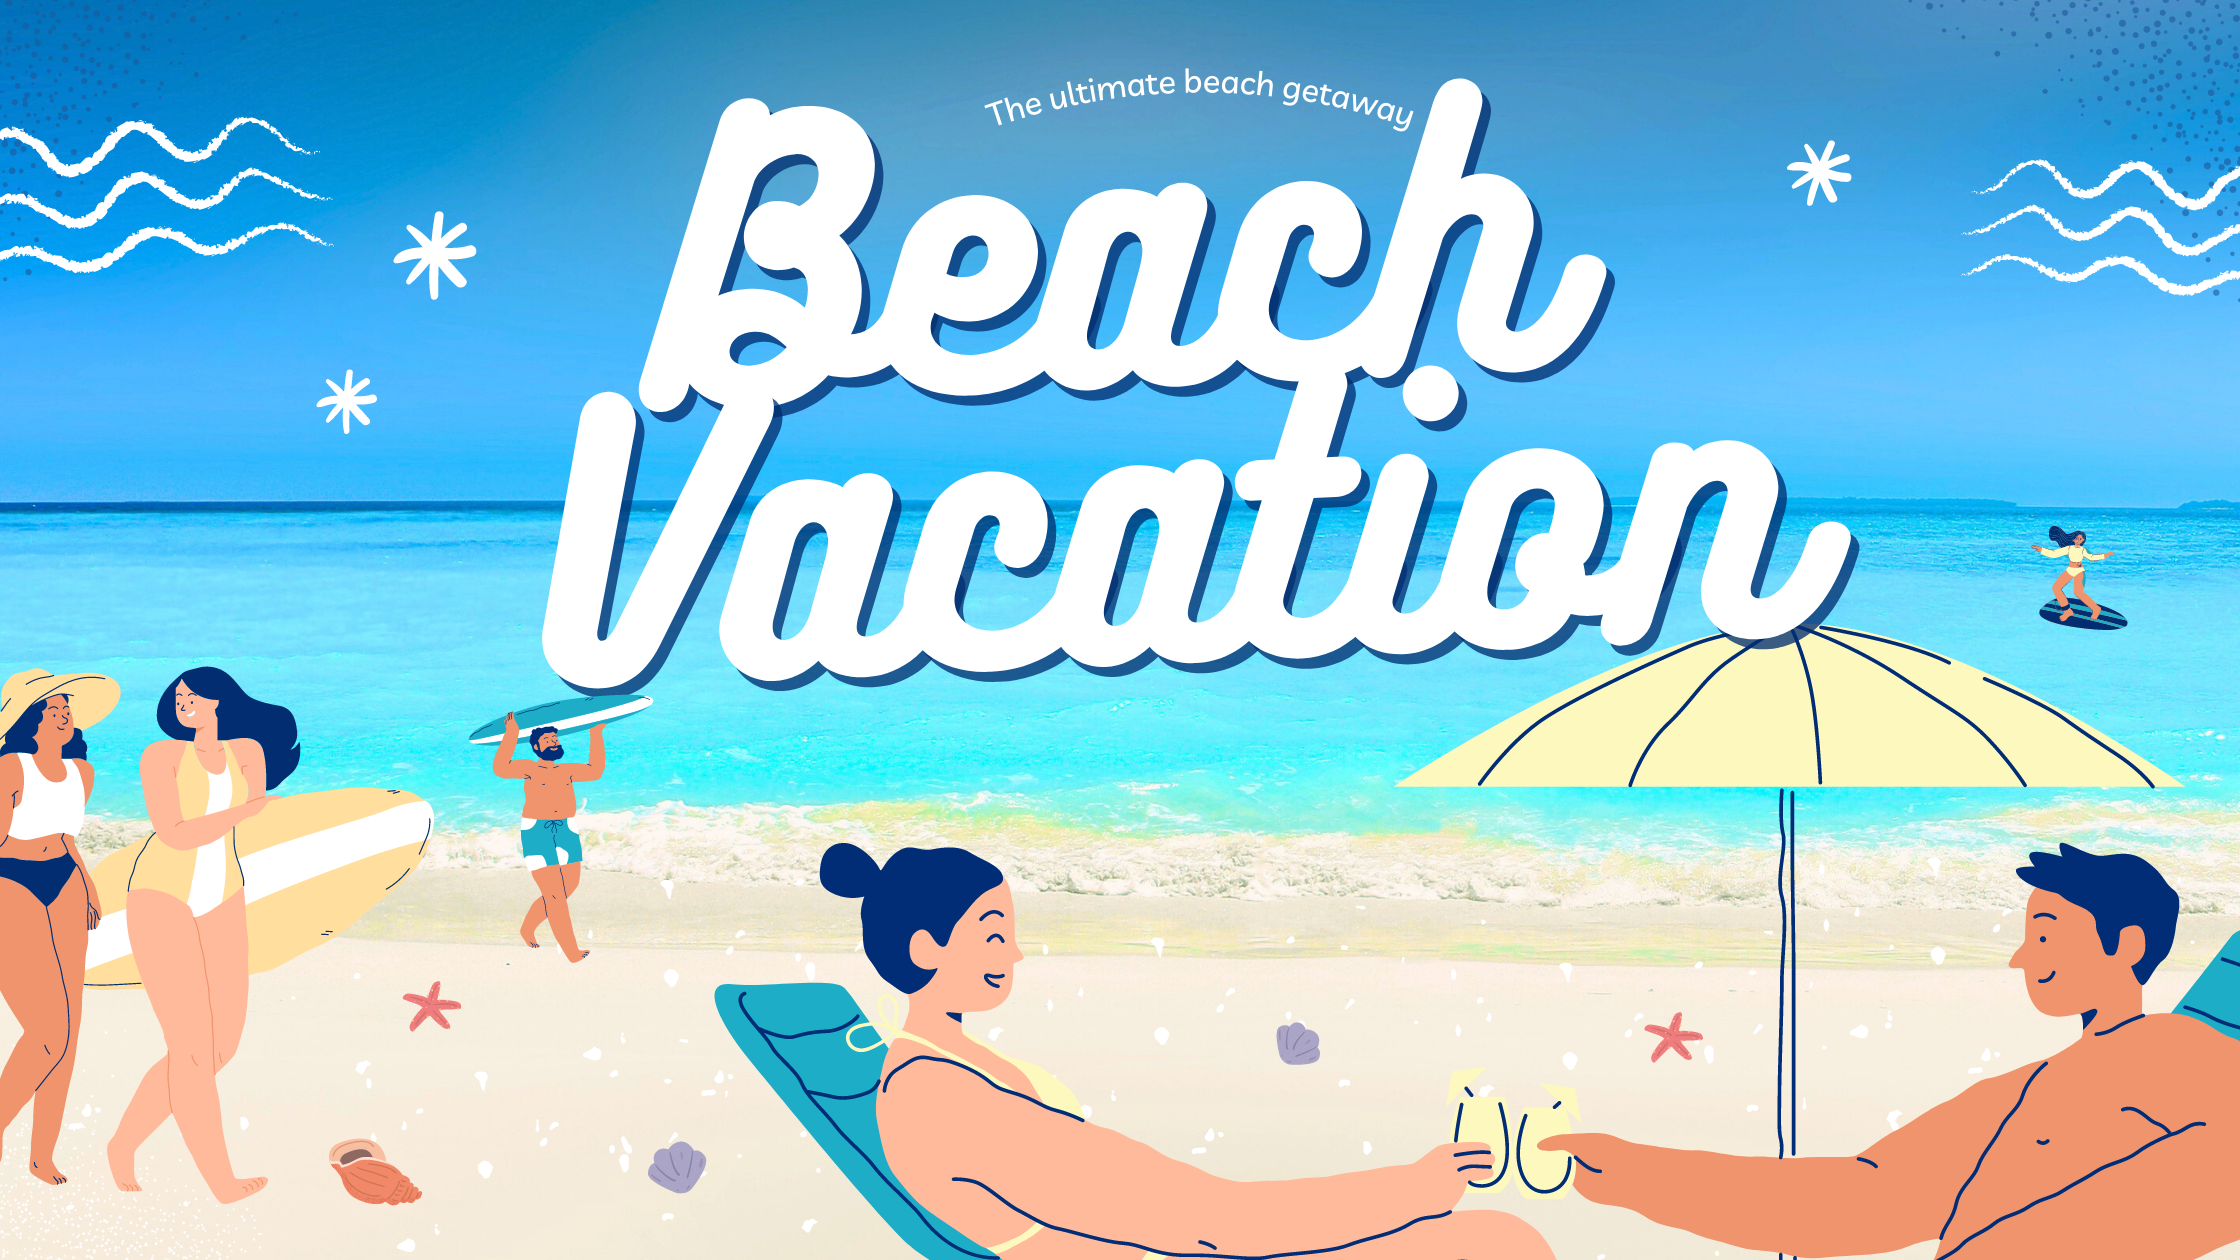 How Much Does A Beach Vacation Cost?